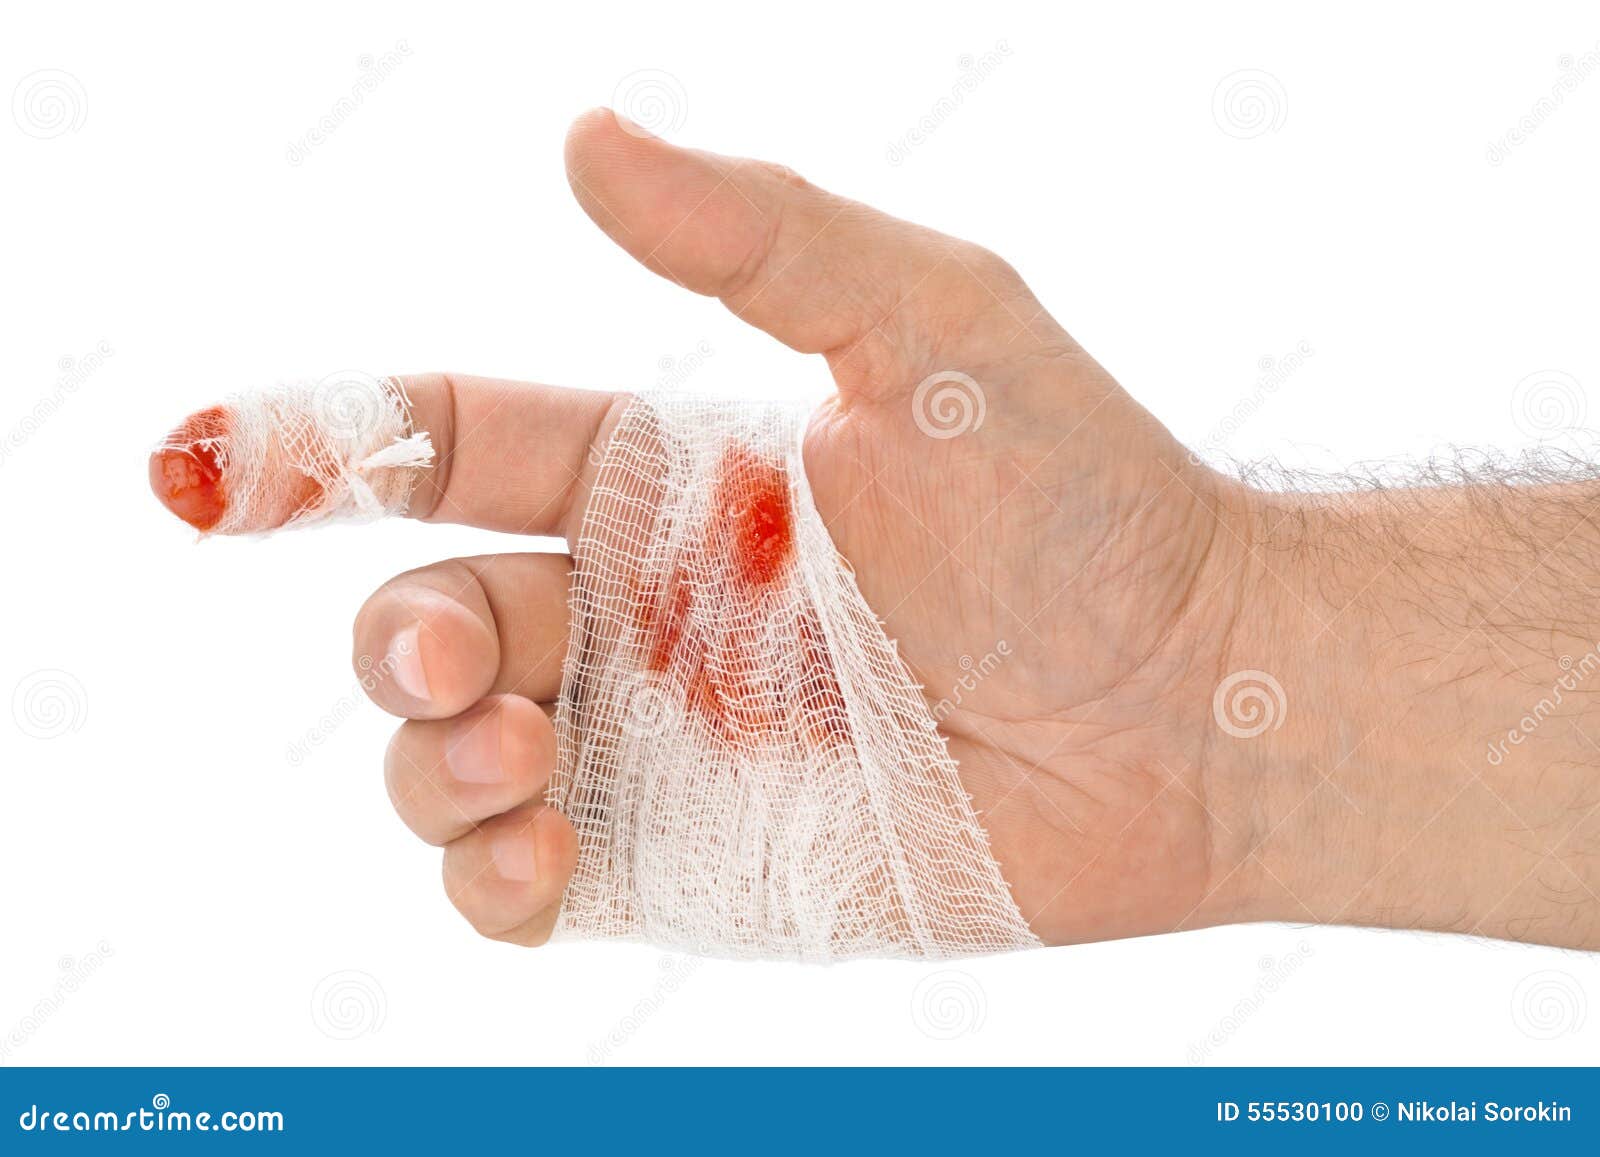 1 531 Hand Blood Bandage Photos Free Royalty Free Stock Photos From Dreamstime